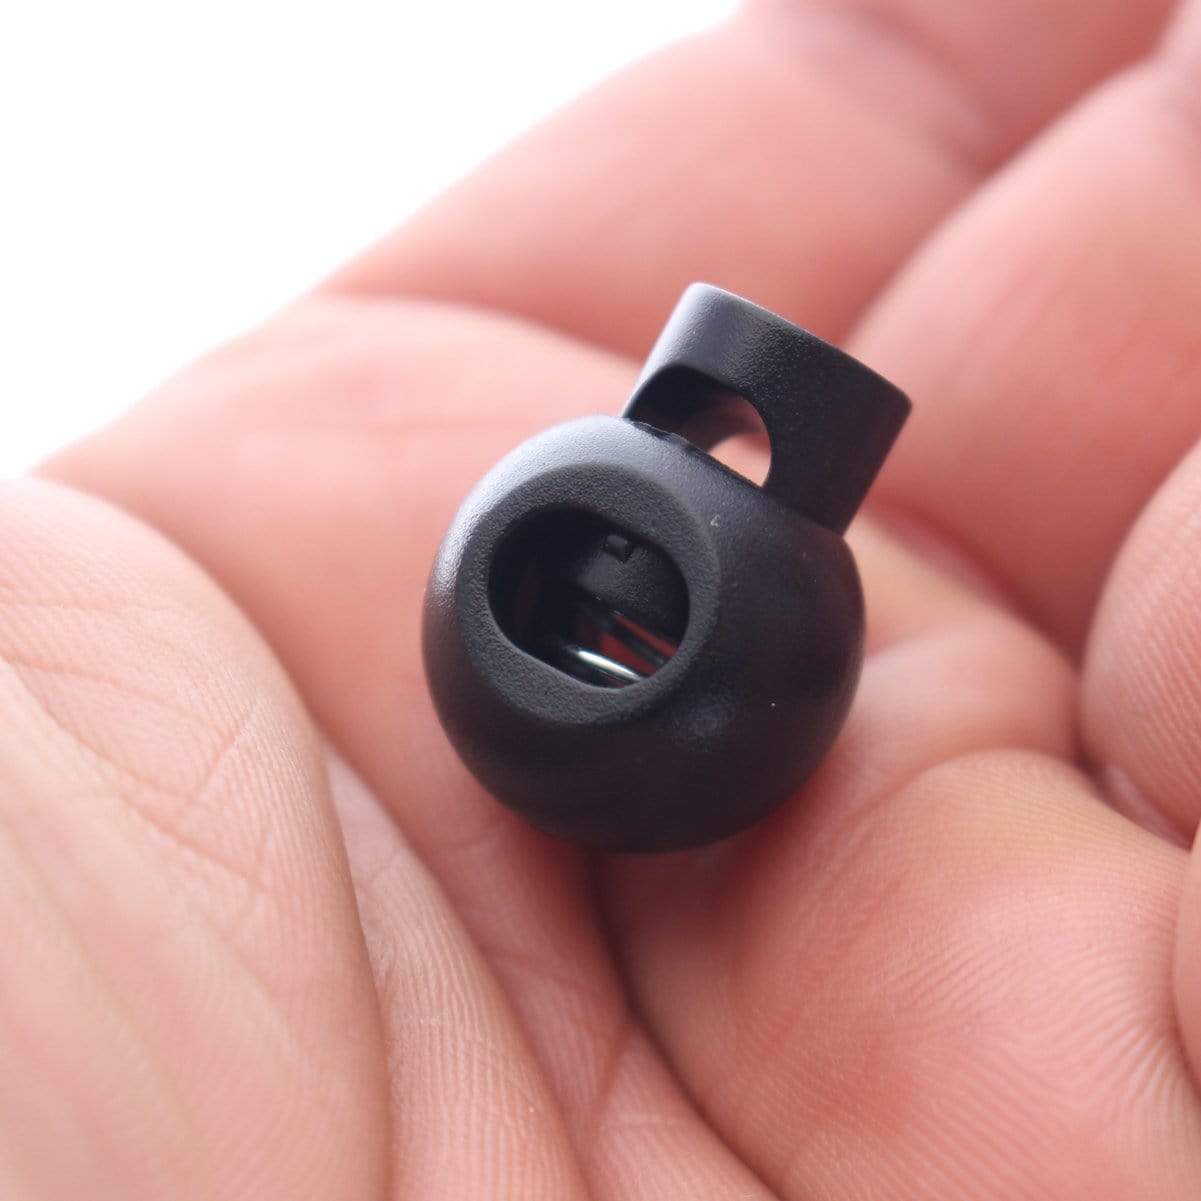 A small, black cylindrical object with an opening and a loop, resembling an Adjustable Cord Lock - Round Ball Style - Single Hole End Toggle for DIY Projects (2135-4001), held in a person's fingertips.